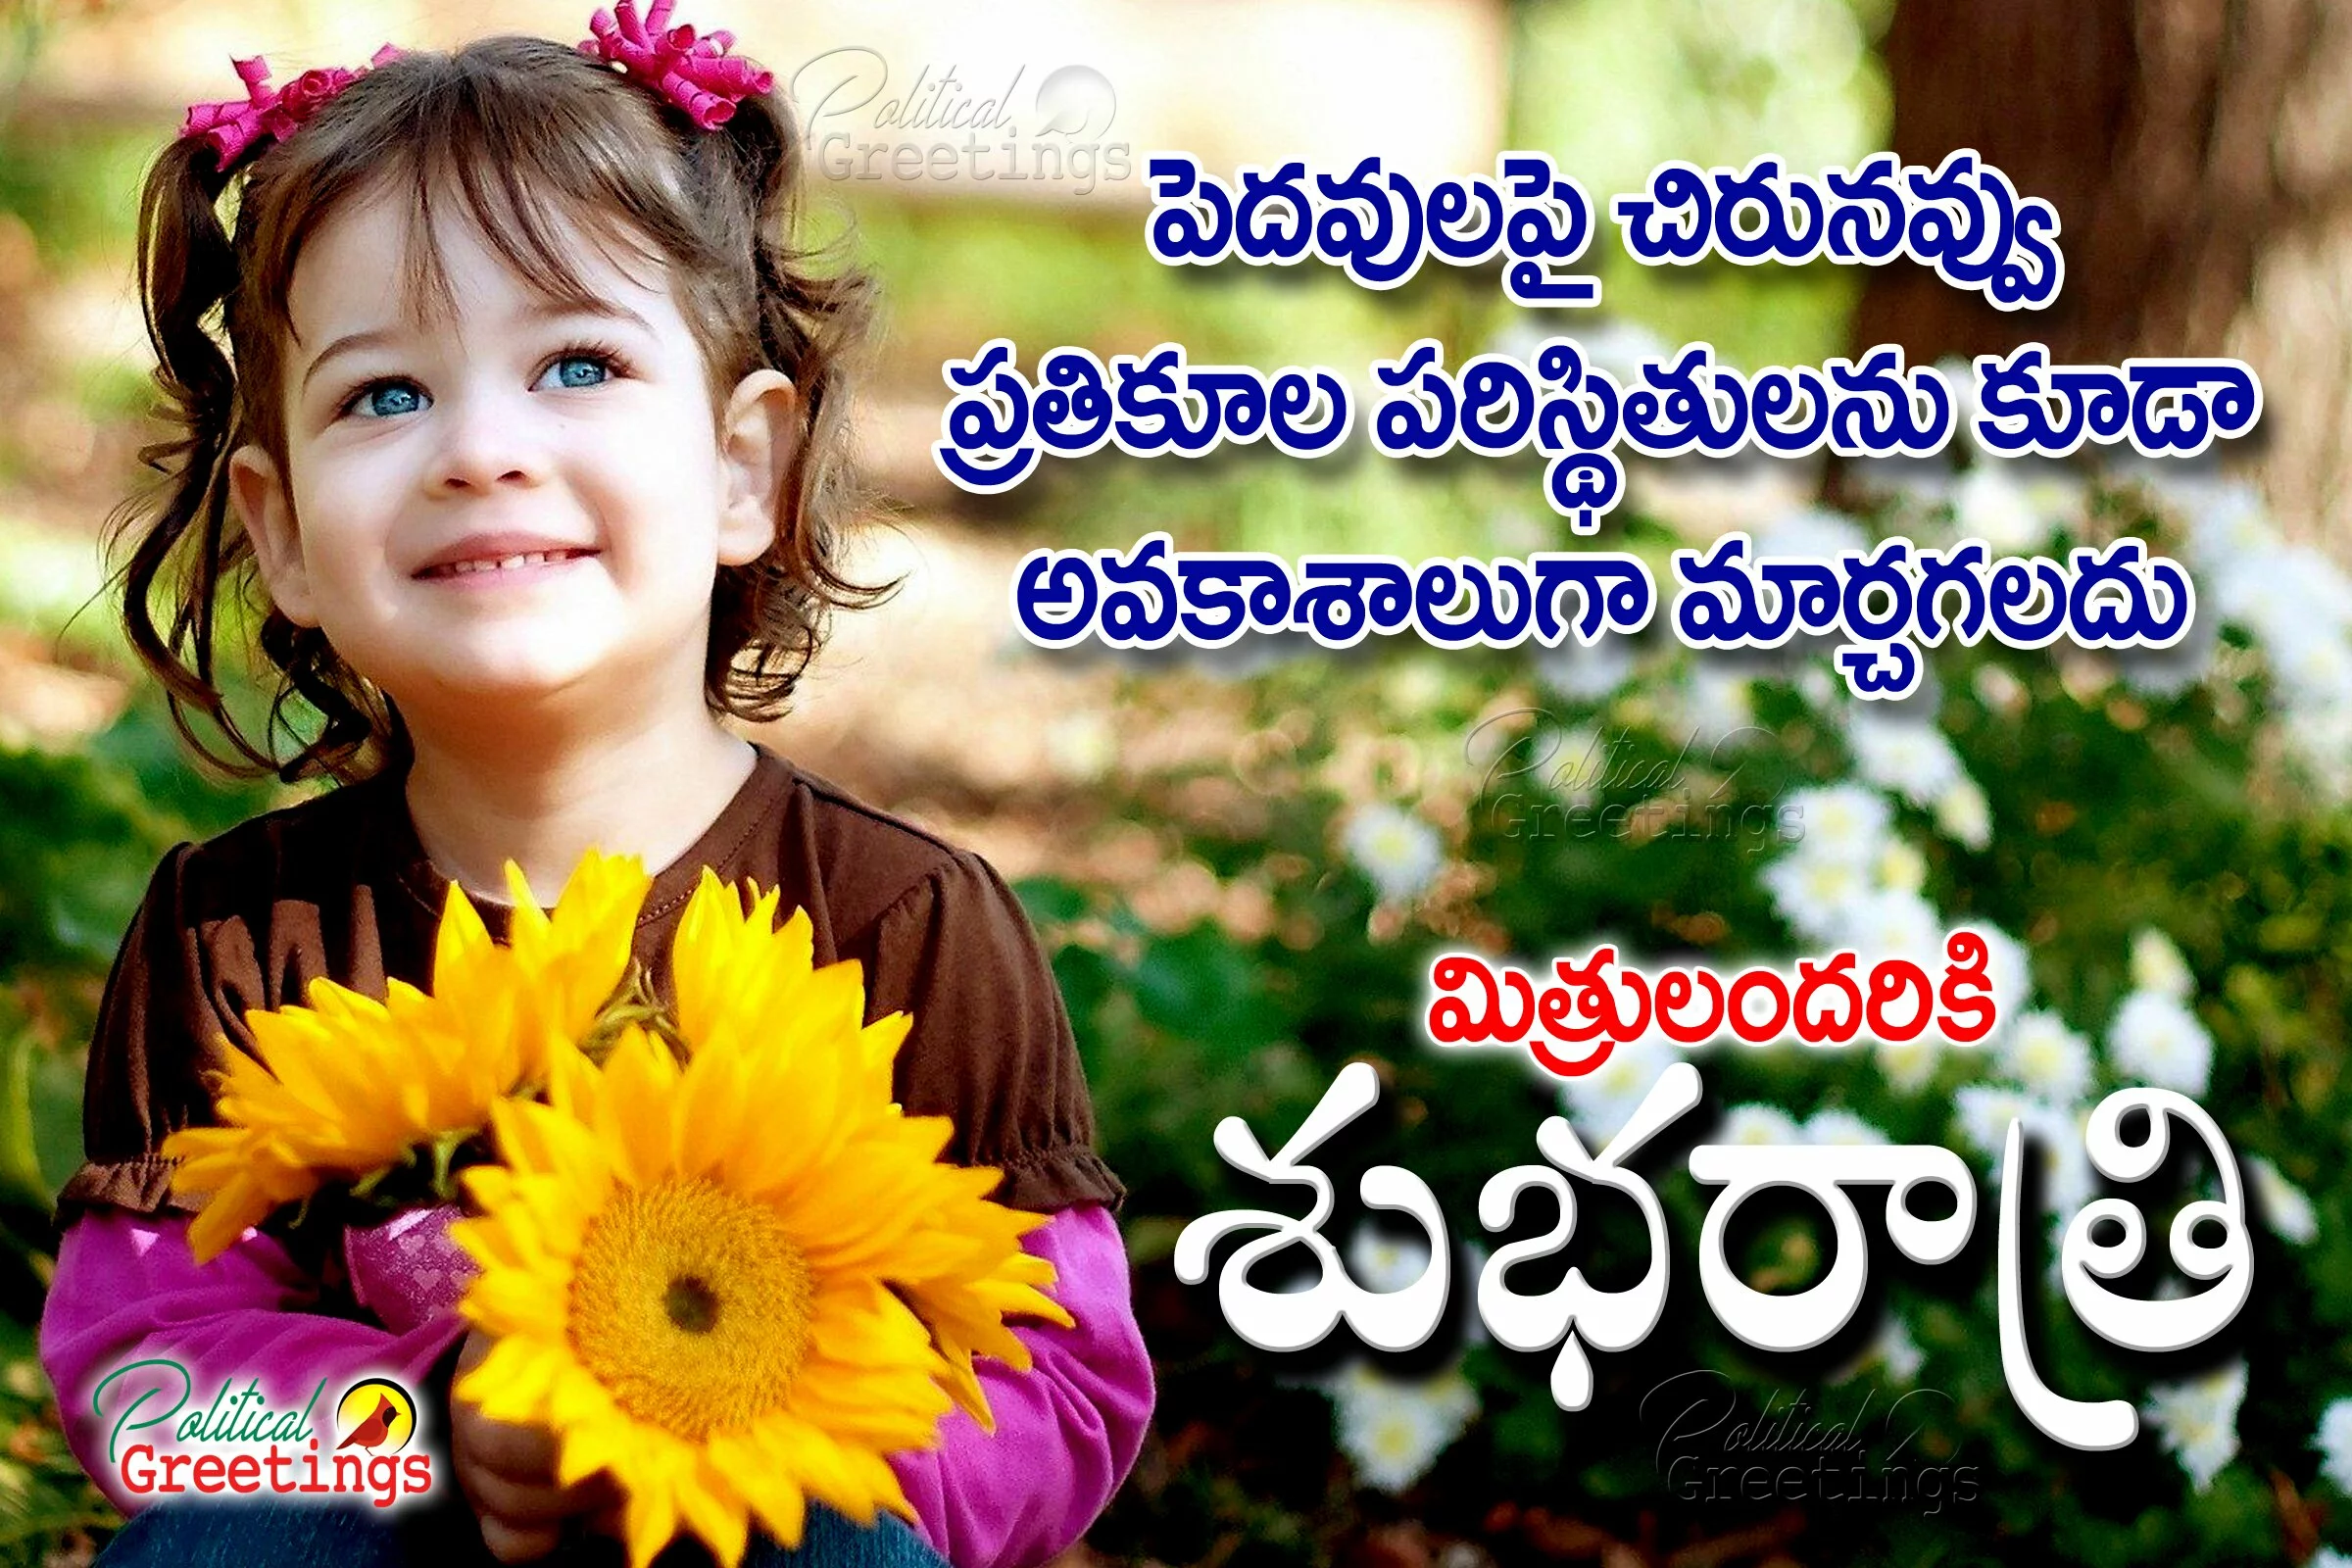 telugu-good-night-smile-wishes-quotes-greetings-hd-wallpapers-copy